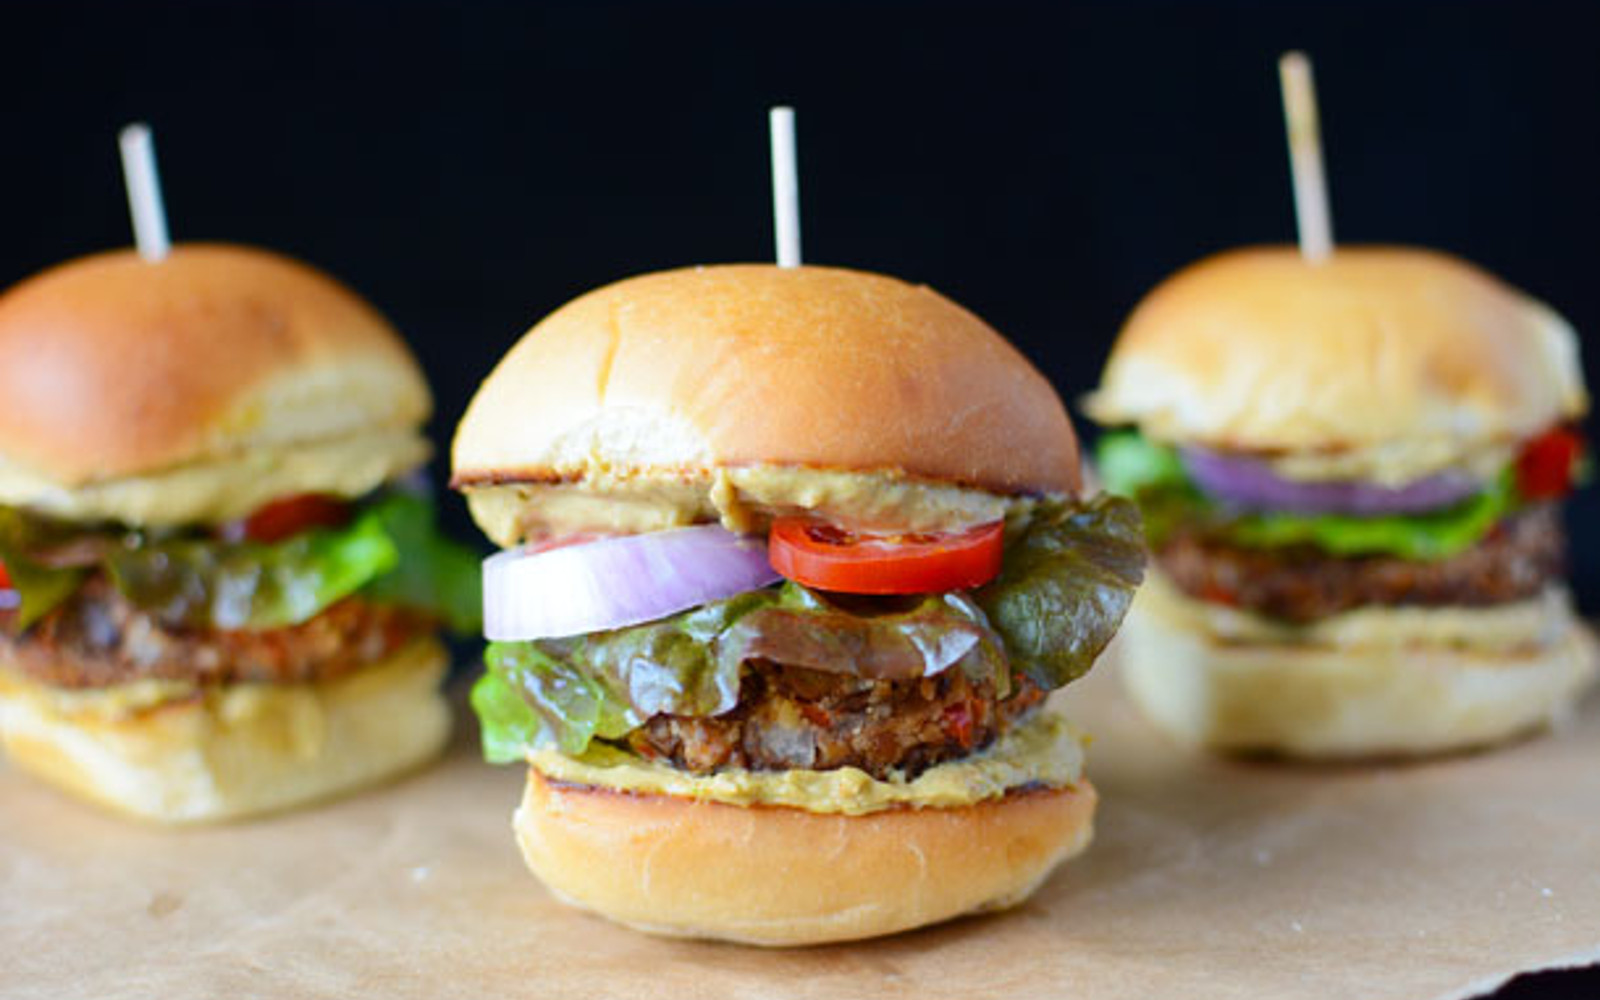 Black Soybean Sliders With Chipotle-Avocado-Lime Sauce